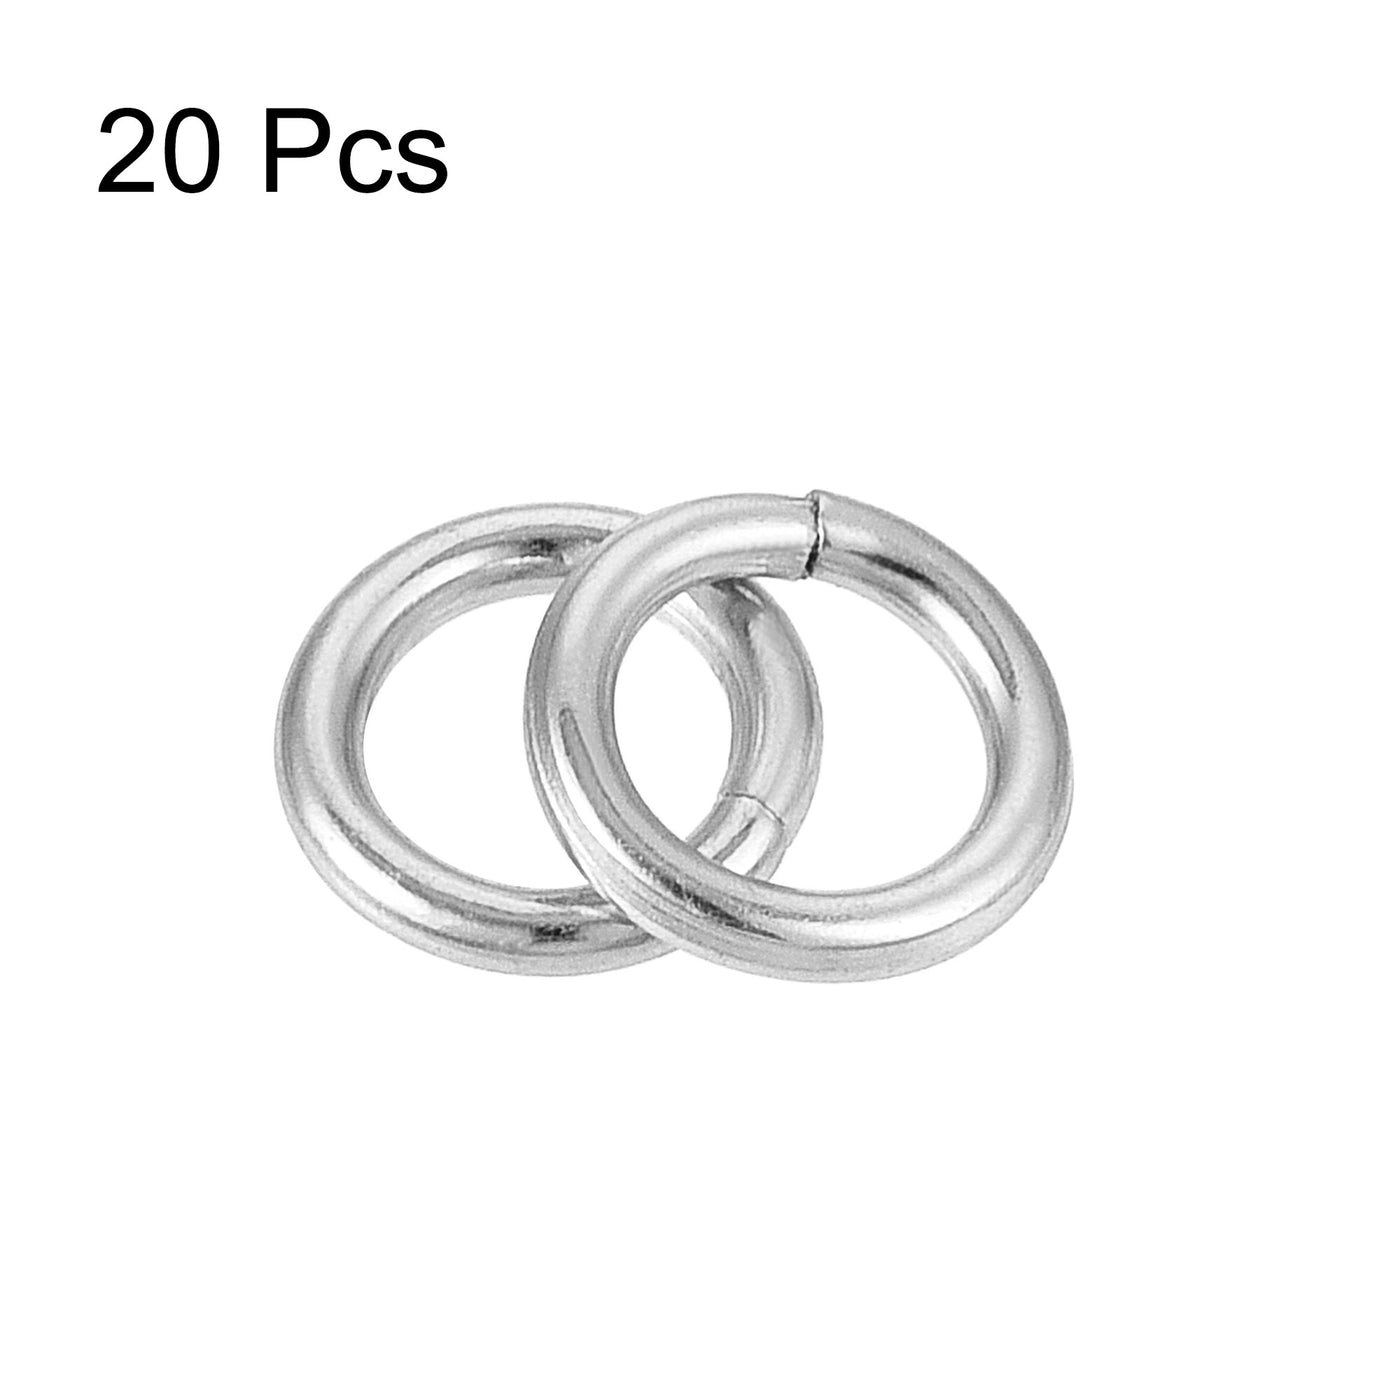 uxcell Uxcell 5mm Metal O Rings Non-Welded for Straps Bags Belts DIY Silver Tone 20pcs